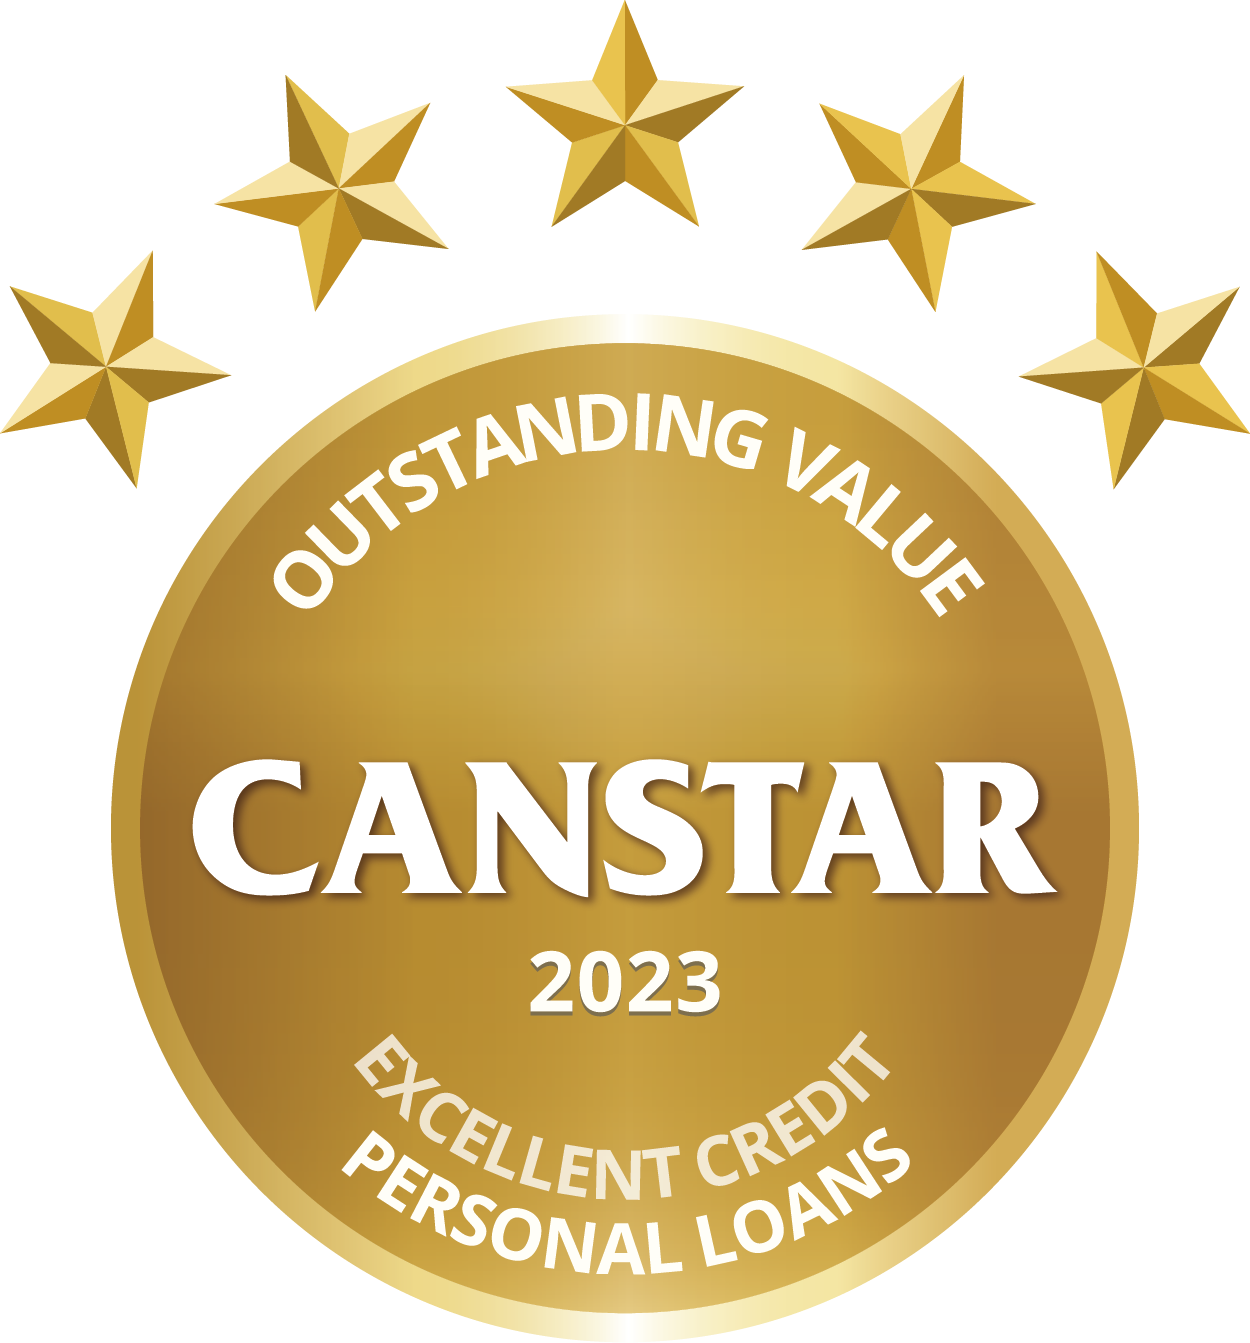 2023 CANSTAR award for Outstanding Value - Excellent Credit Personal Loans